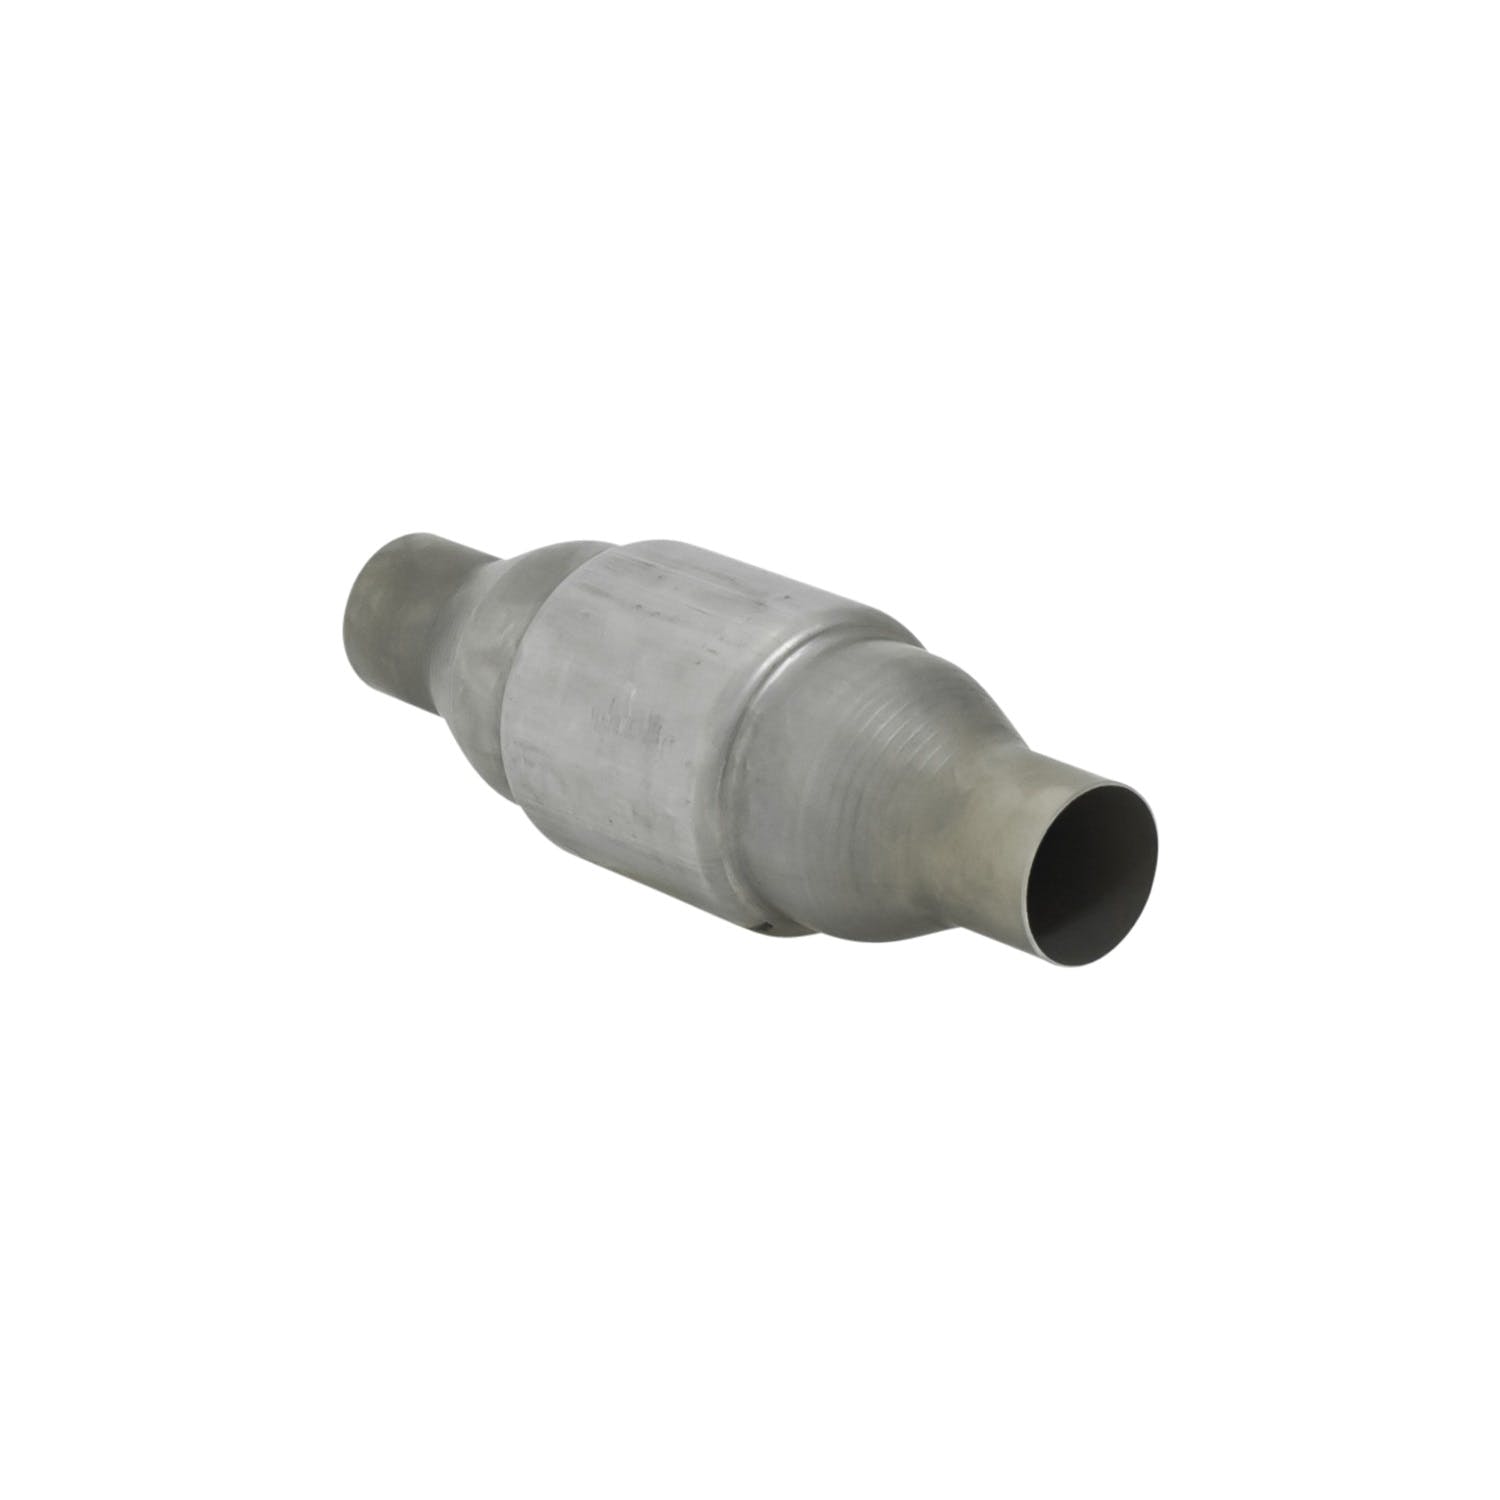 Flowmaster Catalytic Converters 2000120 Catalytic Converter-Universal-200 Series-2.00 in. Inlet/Outlet-49 State